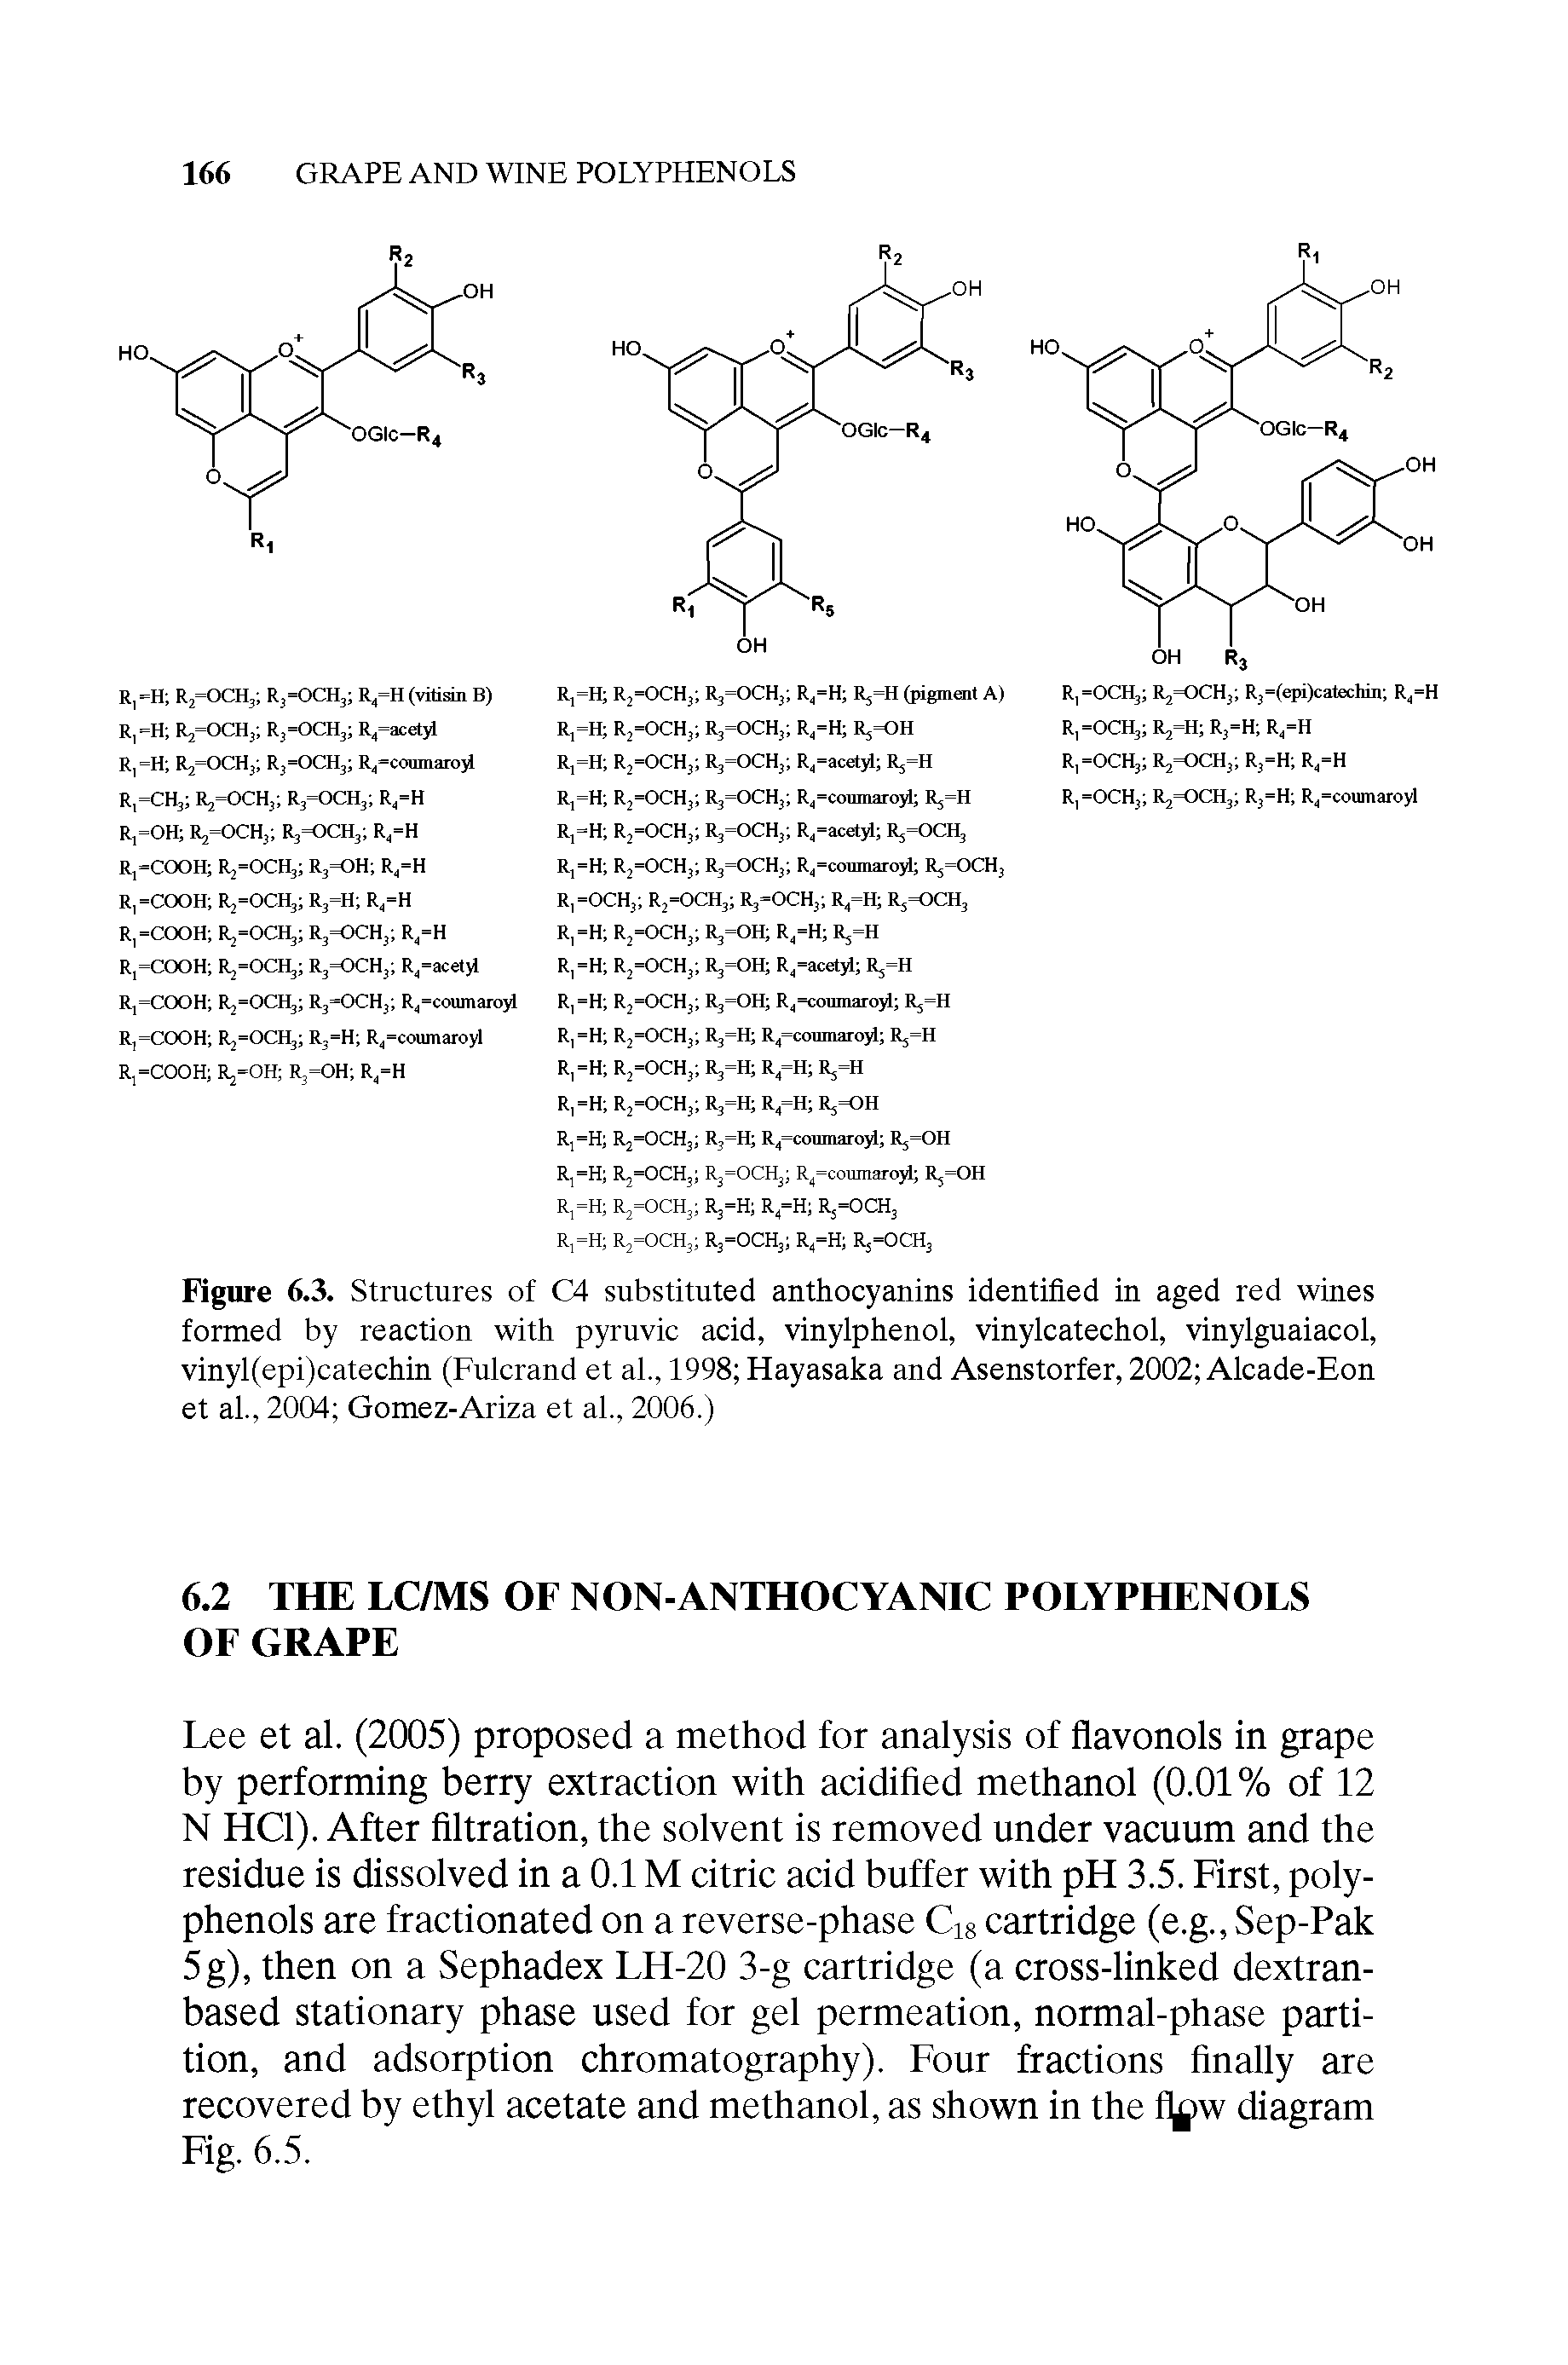 Figure 6.3. Structures of C4 substituted anthocyanins identified in aged red wines formed by reaction with pyruvic acid, vinylphenol, vinylcatechol, vinylguaiacol, vinyl(epi)catechin (Fulcrand et al., 1998 Hayasaka and Asenstorfer, 2002 Alcade-Eon et al., 2004 Gomez-Ariza et al., 2006.)...